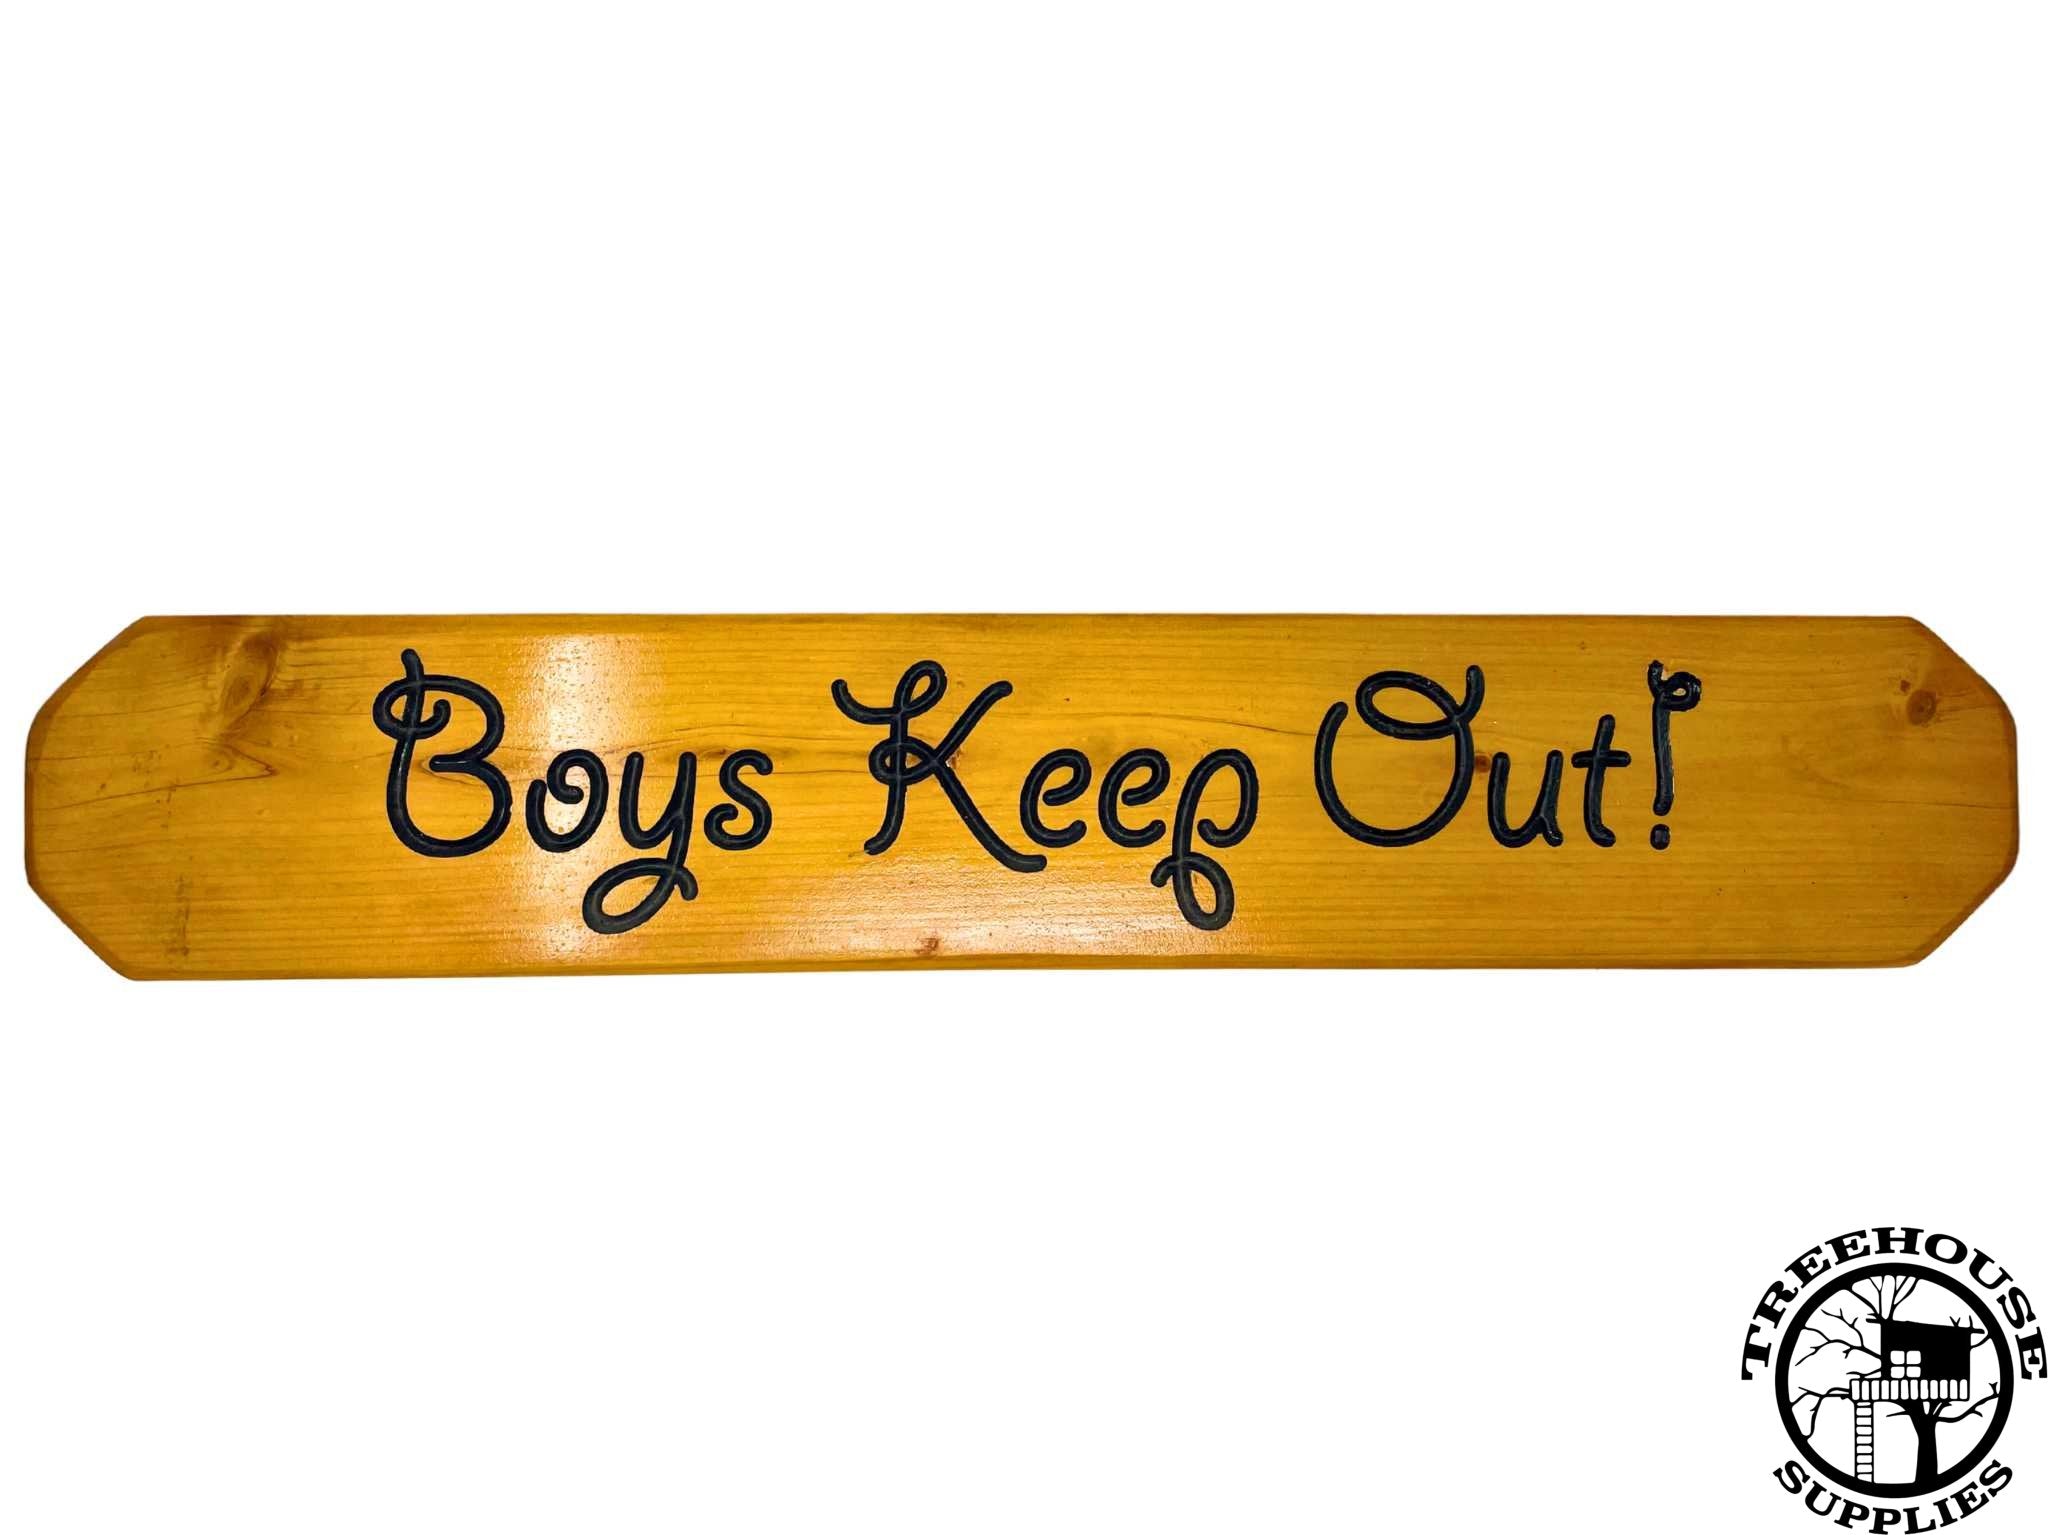 Two-foot-long wooden sign with lettering. Engraved or carved text states Boys Keep Out! White Background.